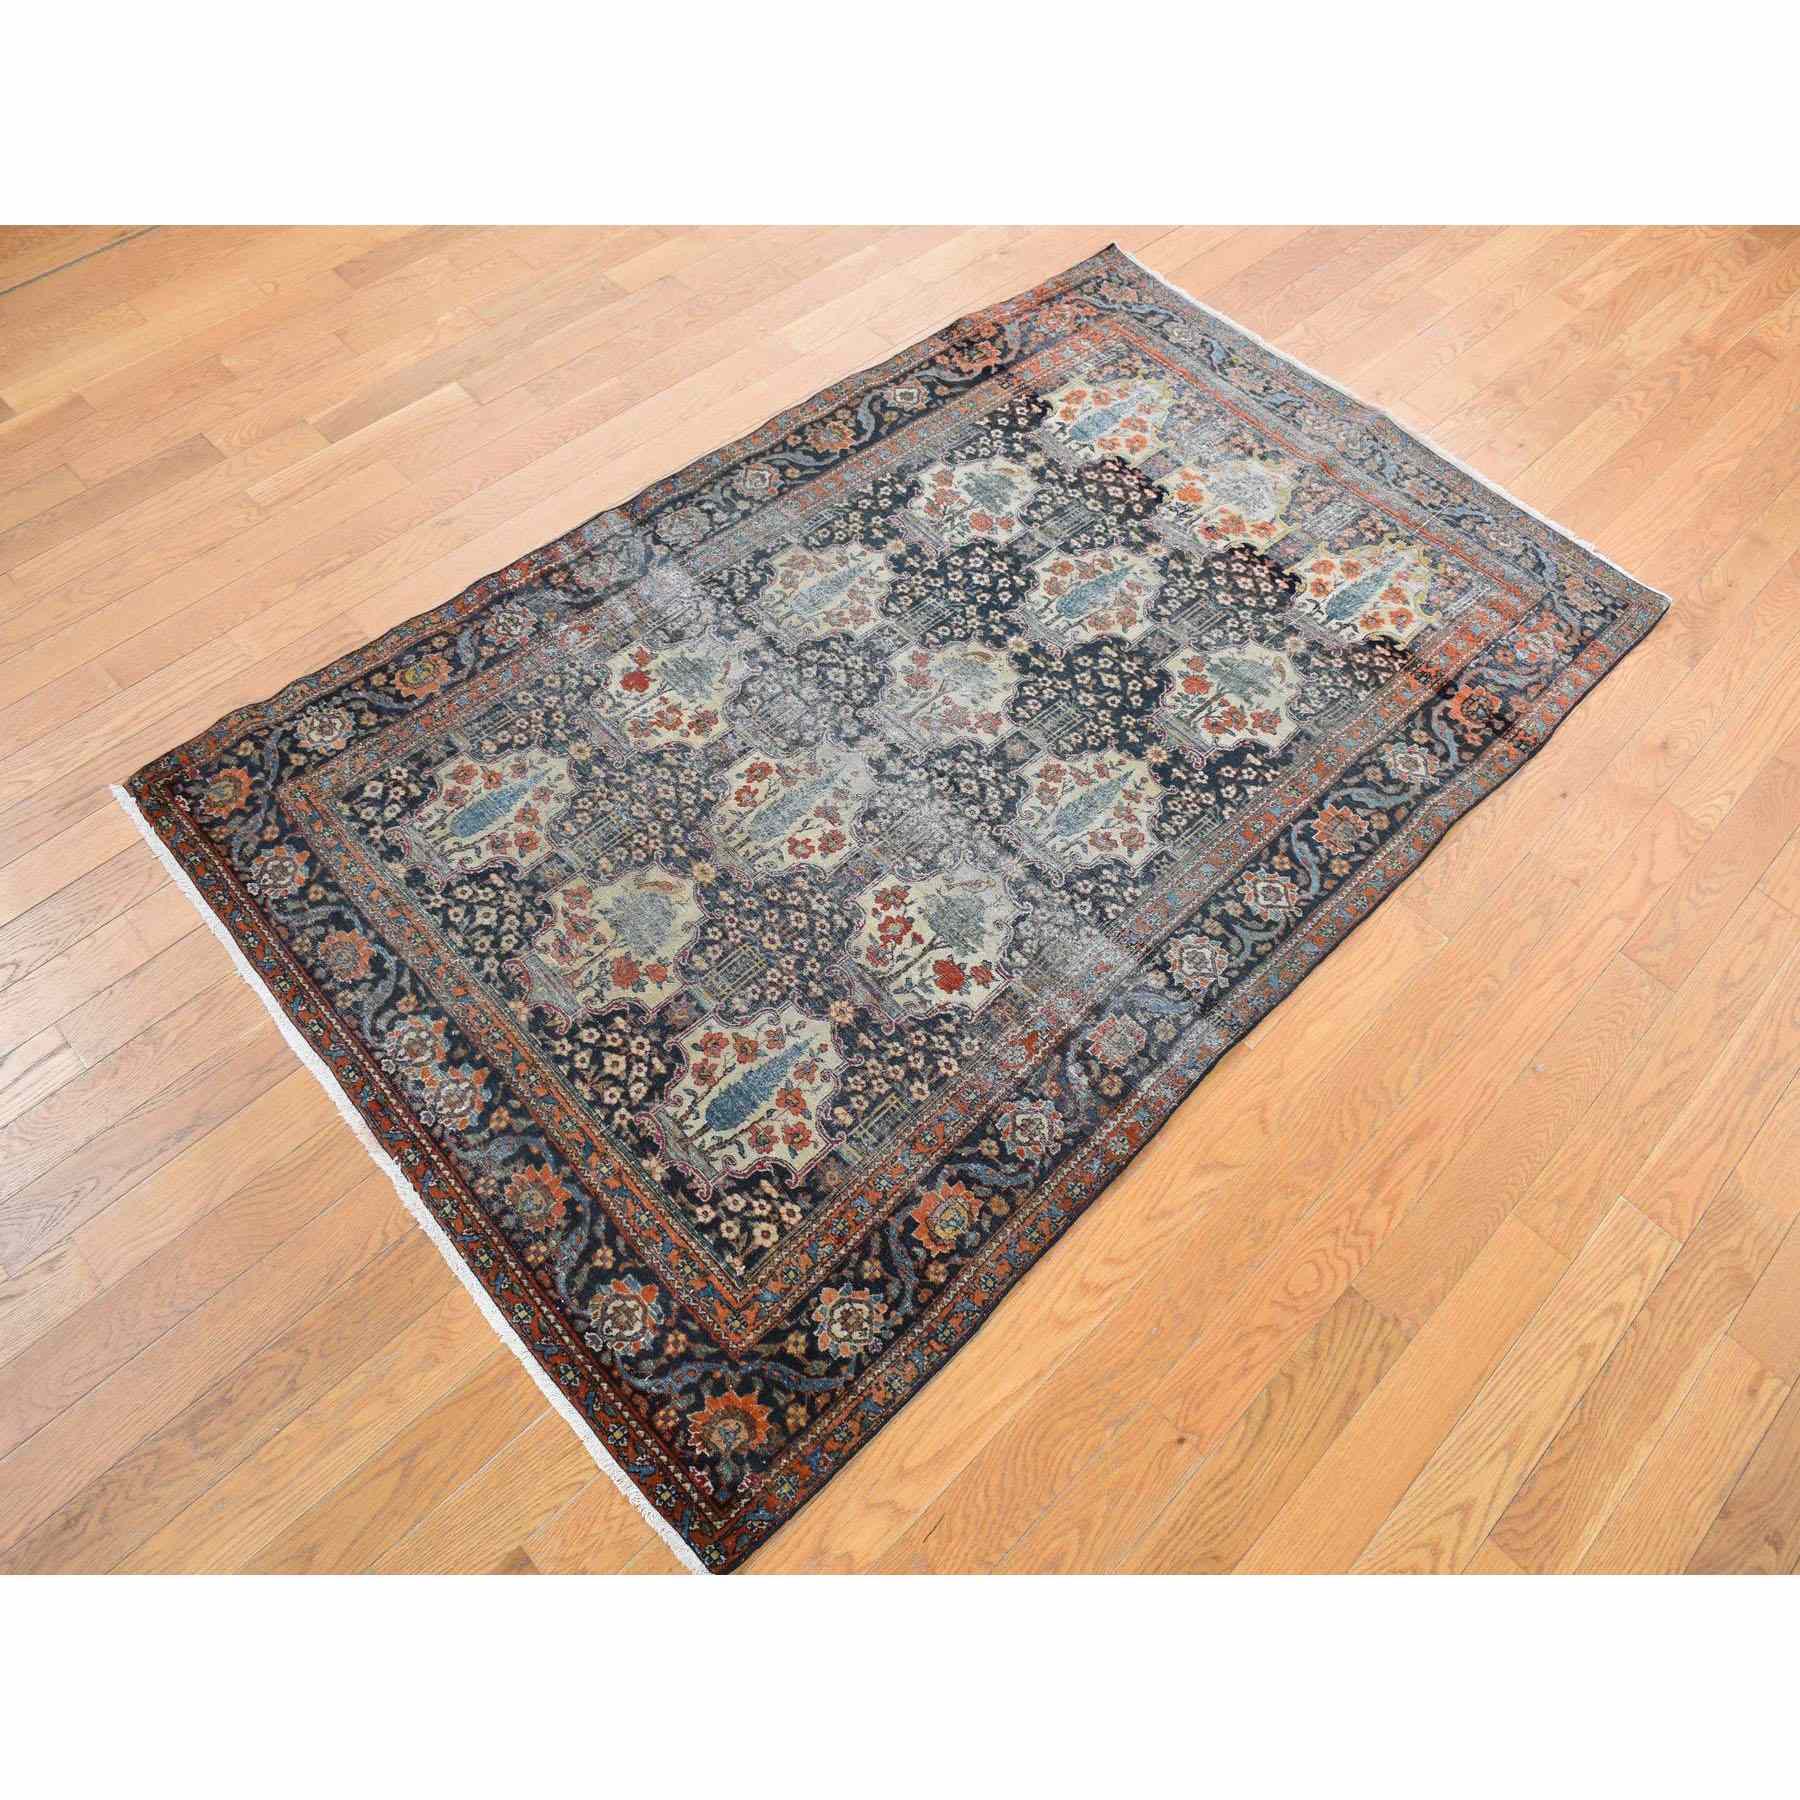 Antique-Hand-Knotted-Rug-390365